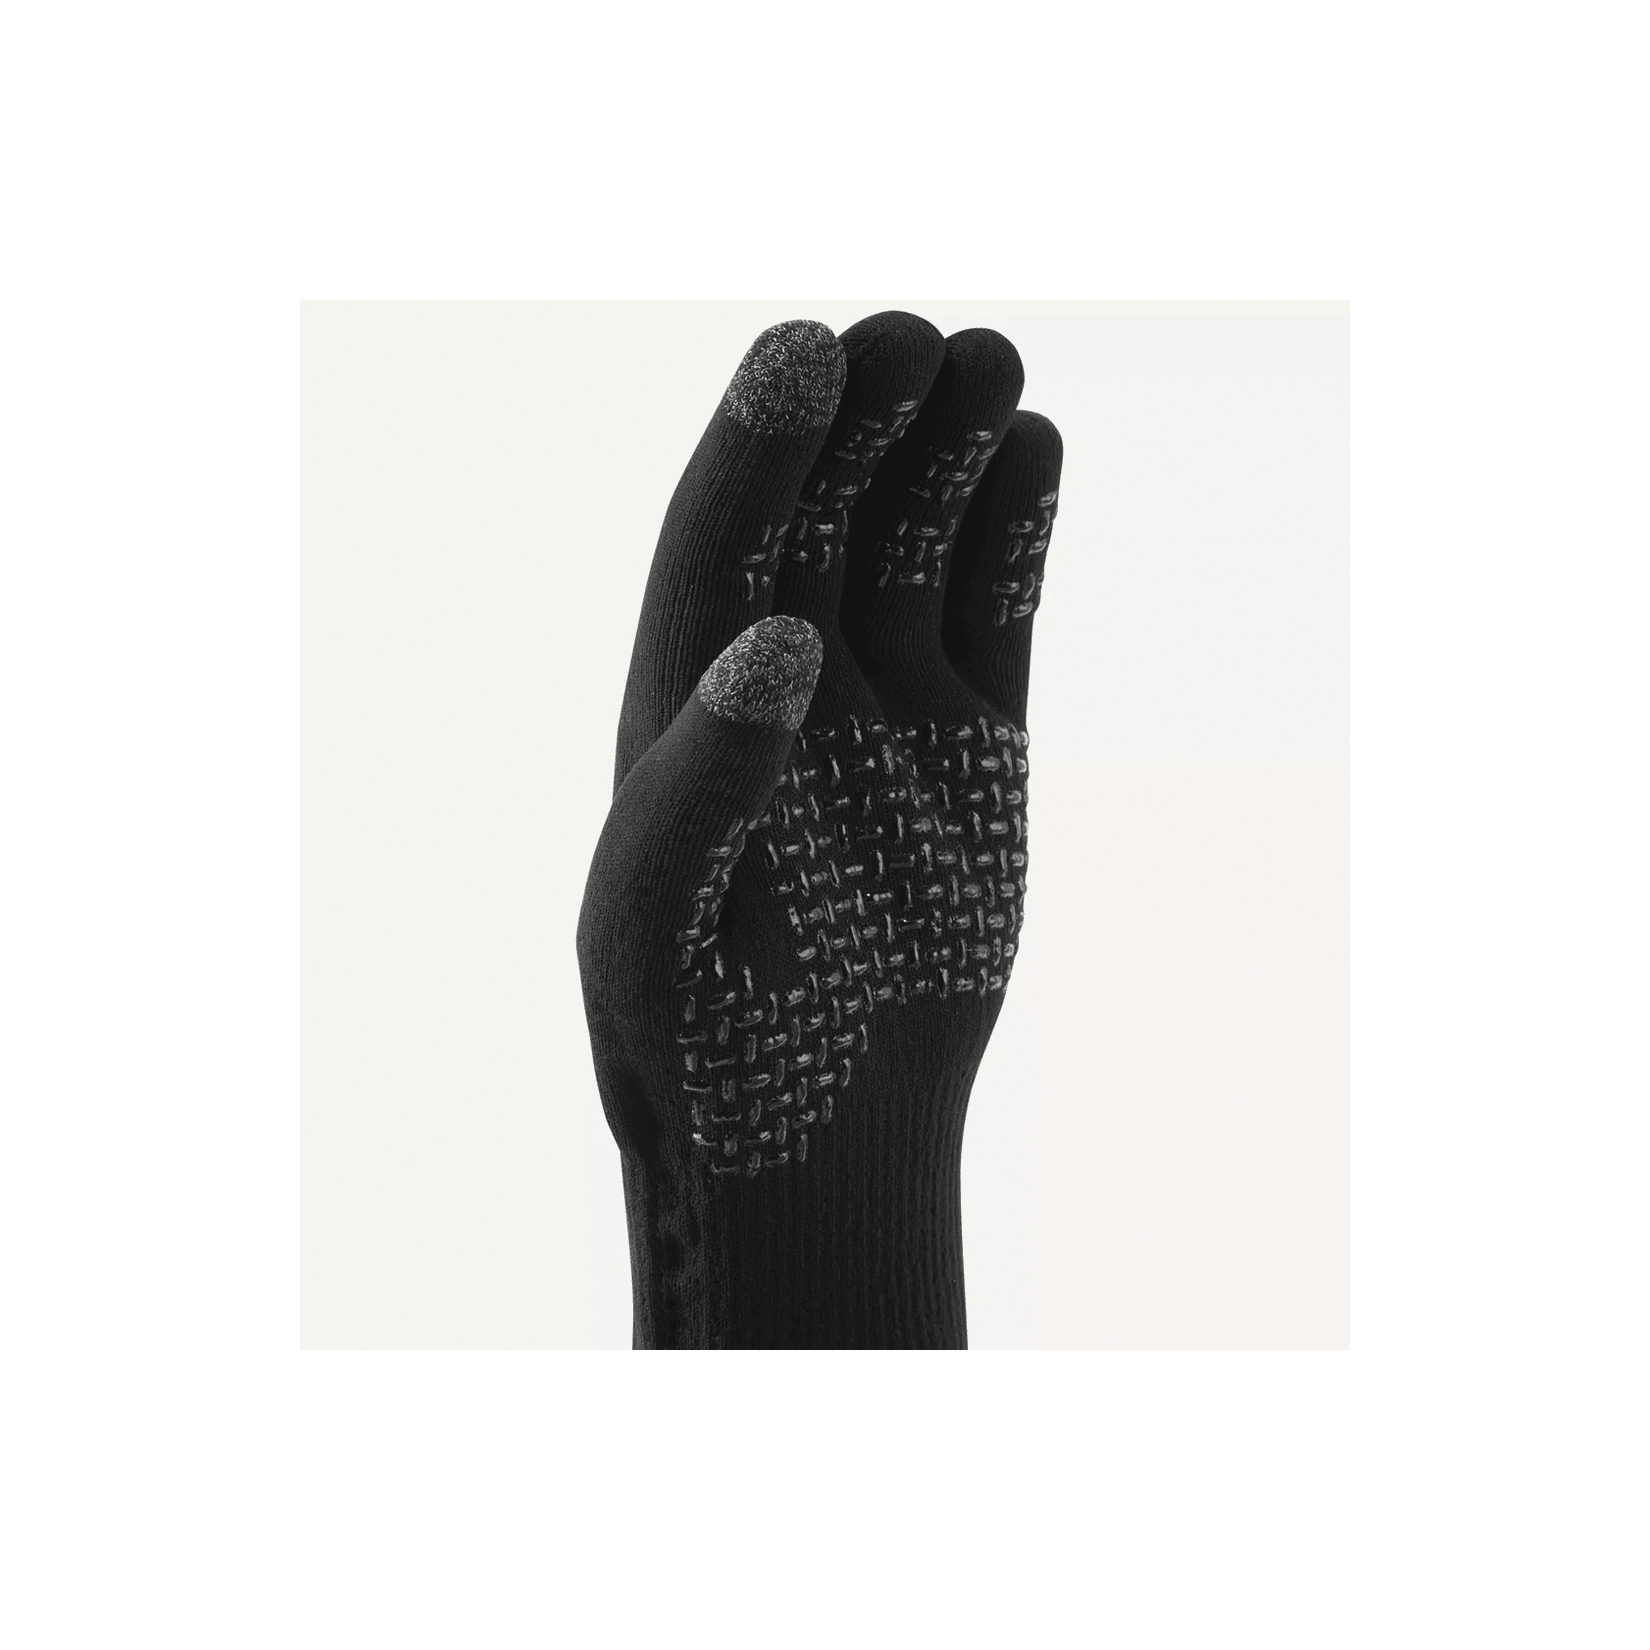 Sealskinz Anmer Waterproof All Weather Ultra Grip Knitted Gloves